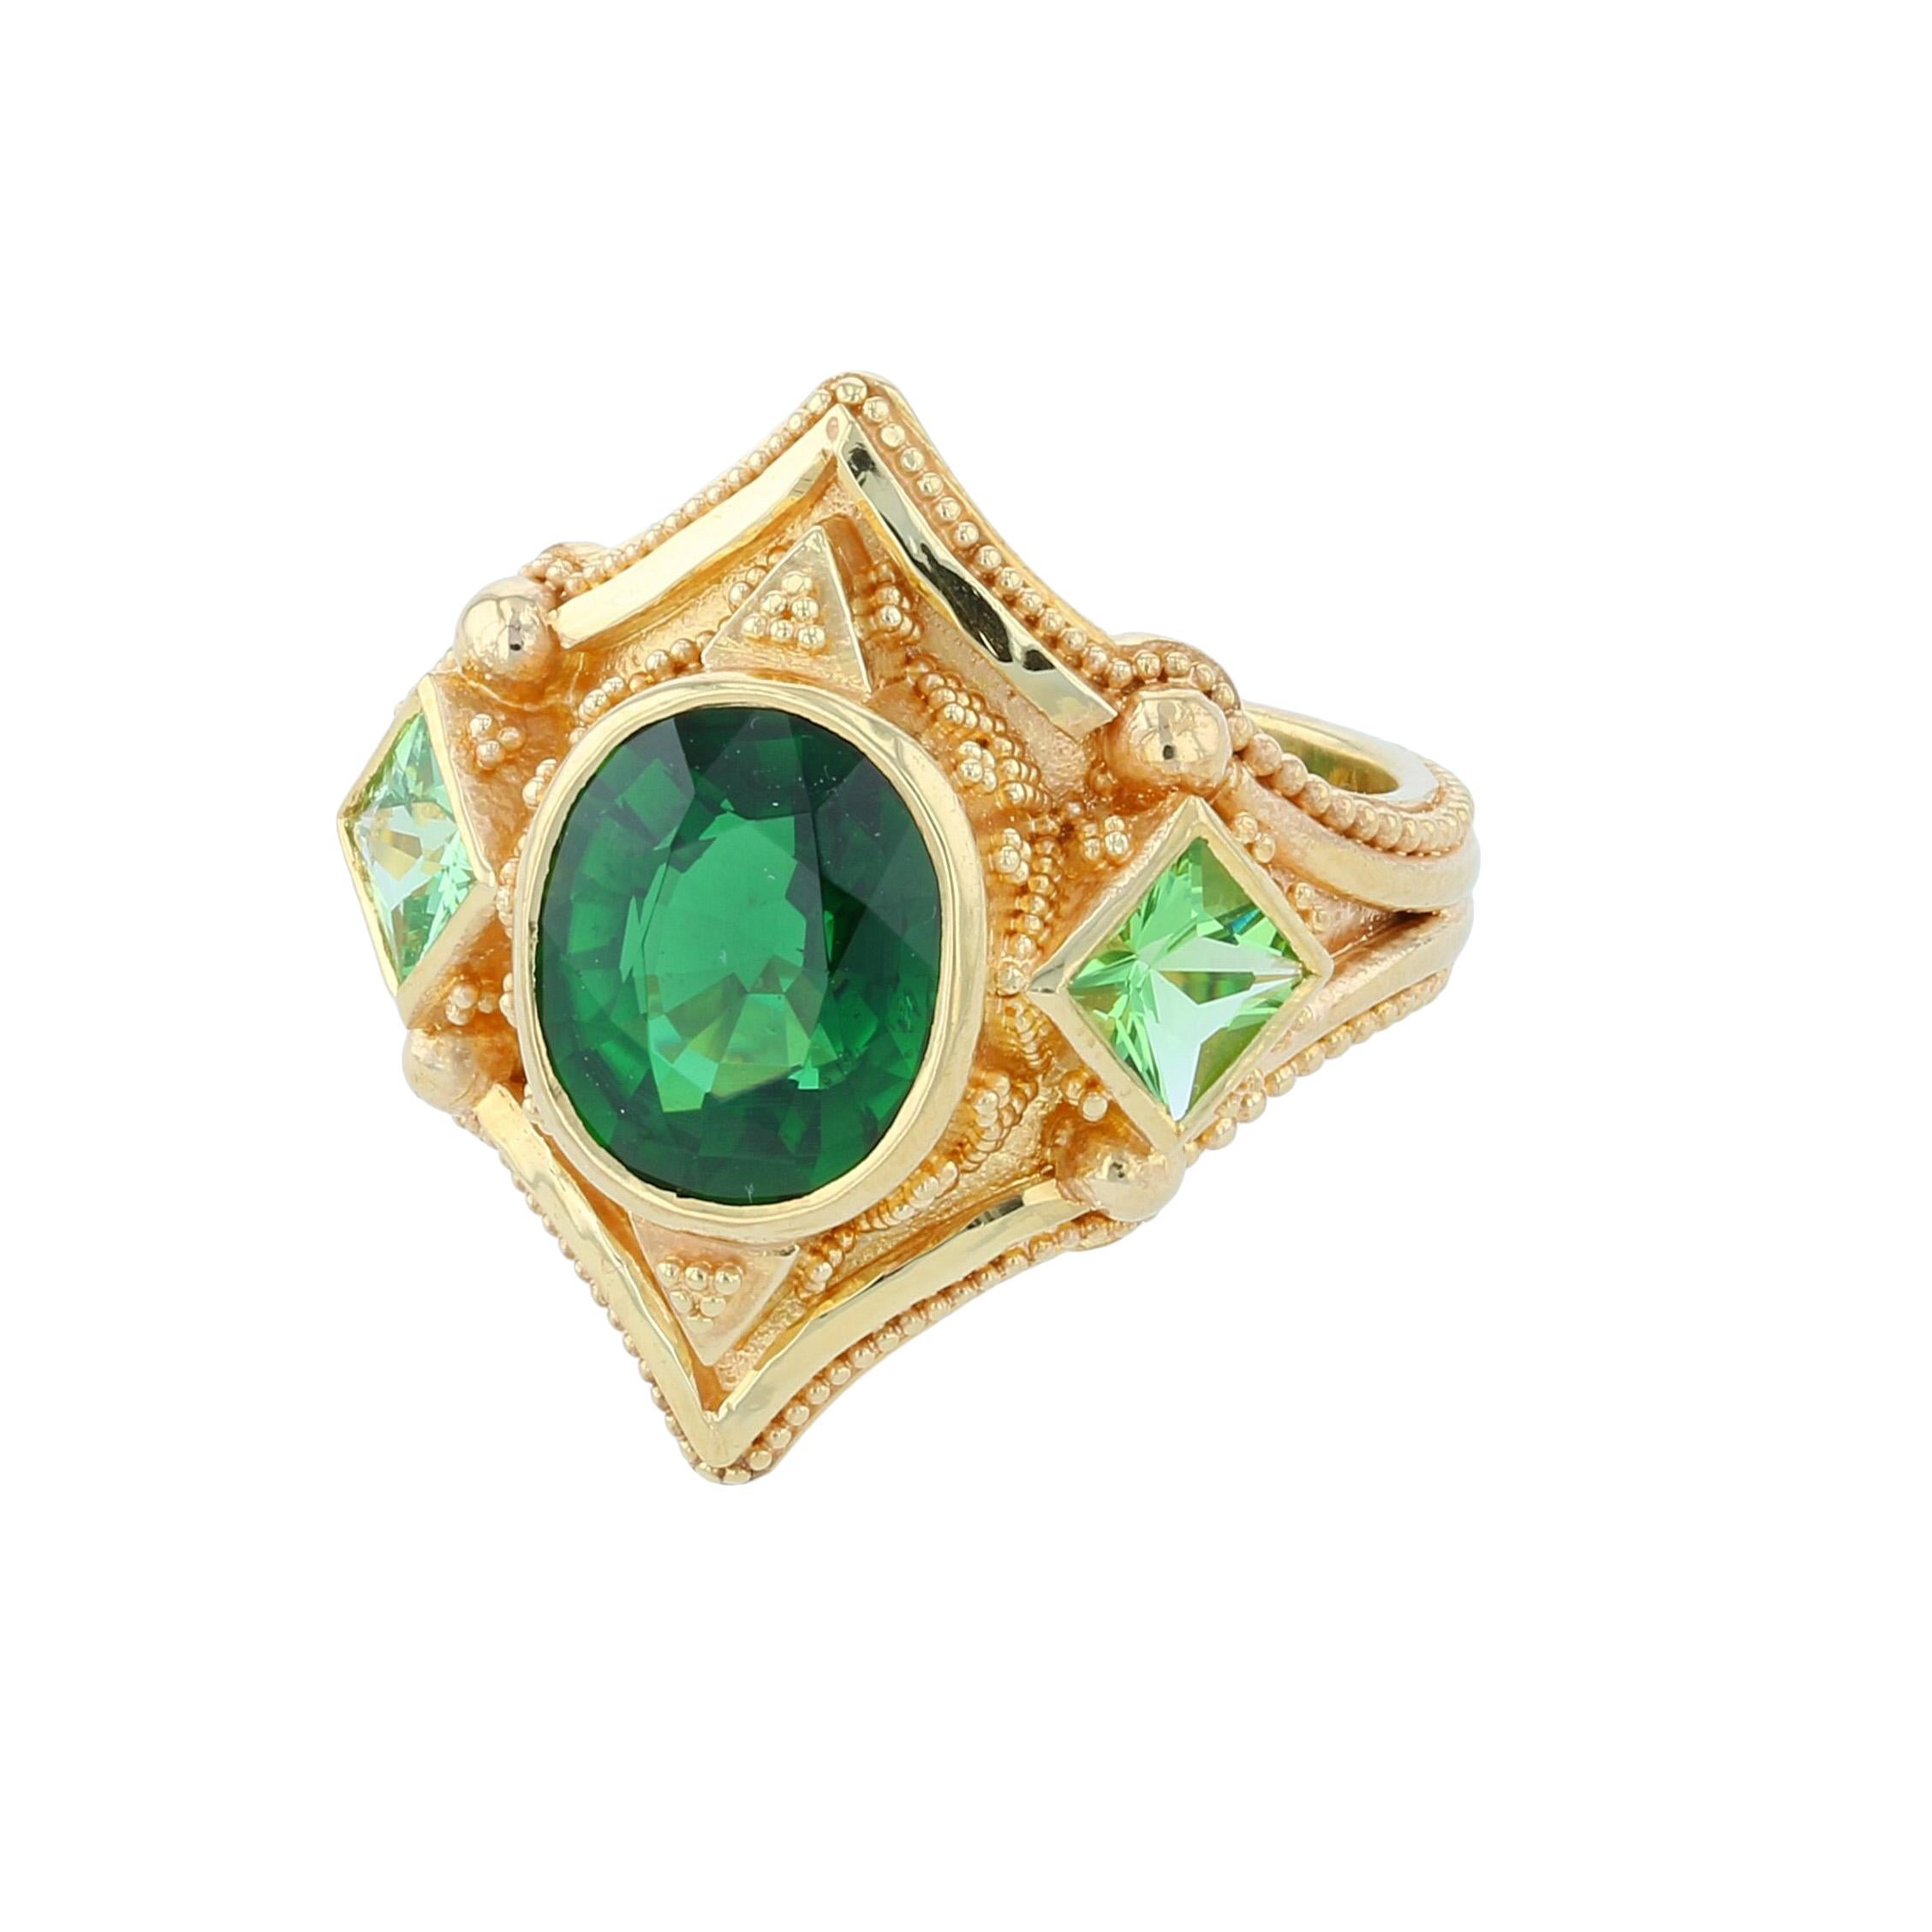 Kent Raible's bespoke ring 'Shades of Green' brings fluid lines and fine granulation nestled in a lovely and bold golden boarder with all the fine detail and accents we expect to find in a Raible original. His love for Chrome Tourmaline meets his